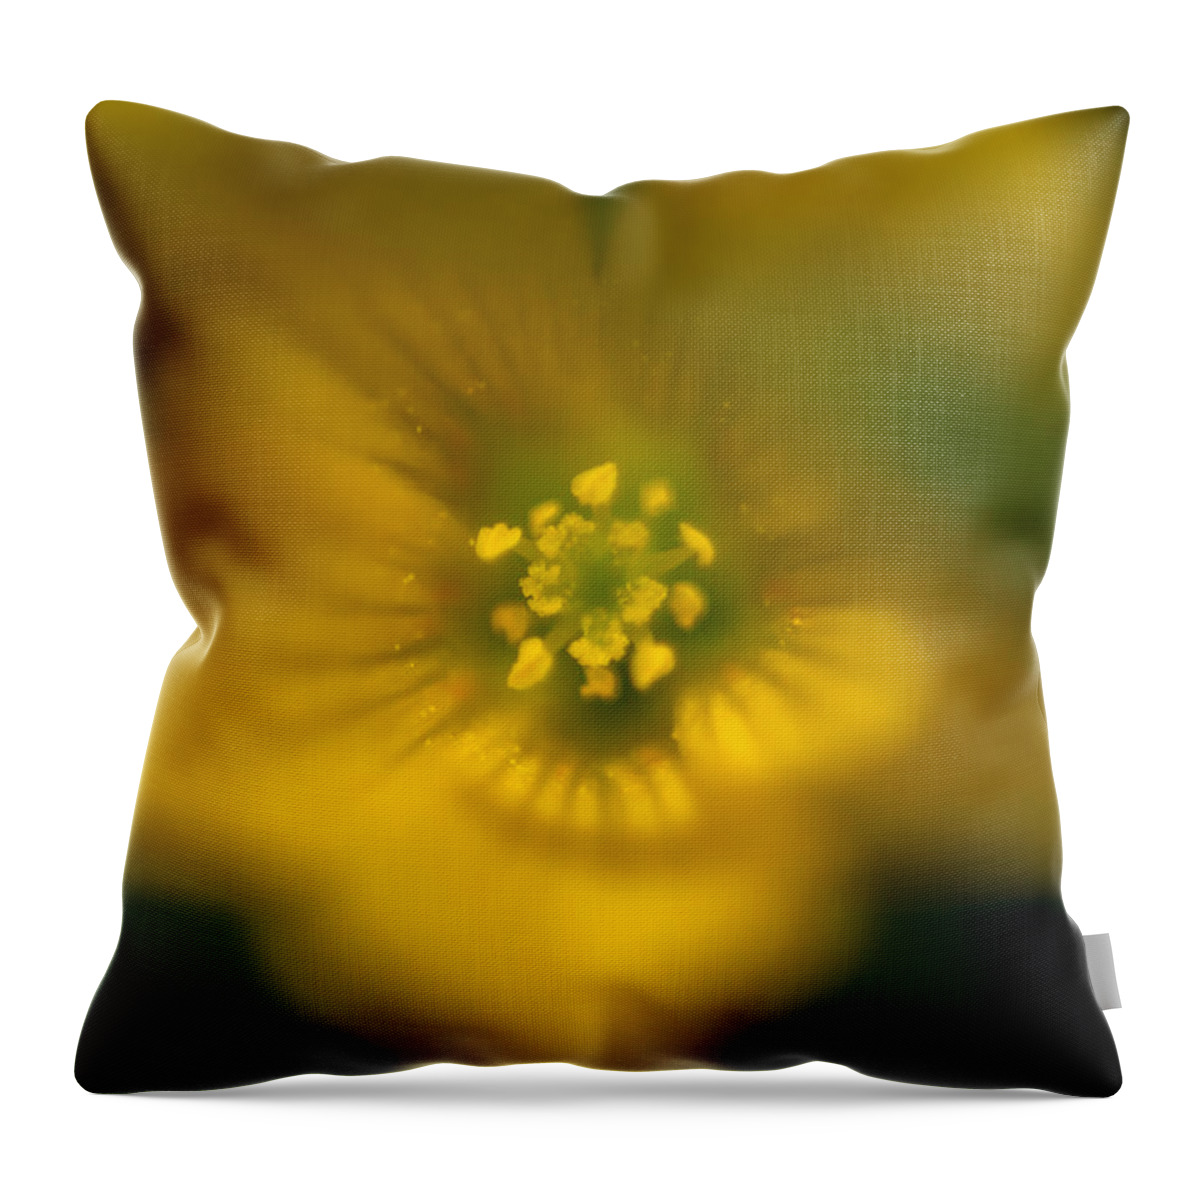 Jay Stockhaus Throw Pillow featuring the photograph Yellow Clover by Jay Stockhaus